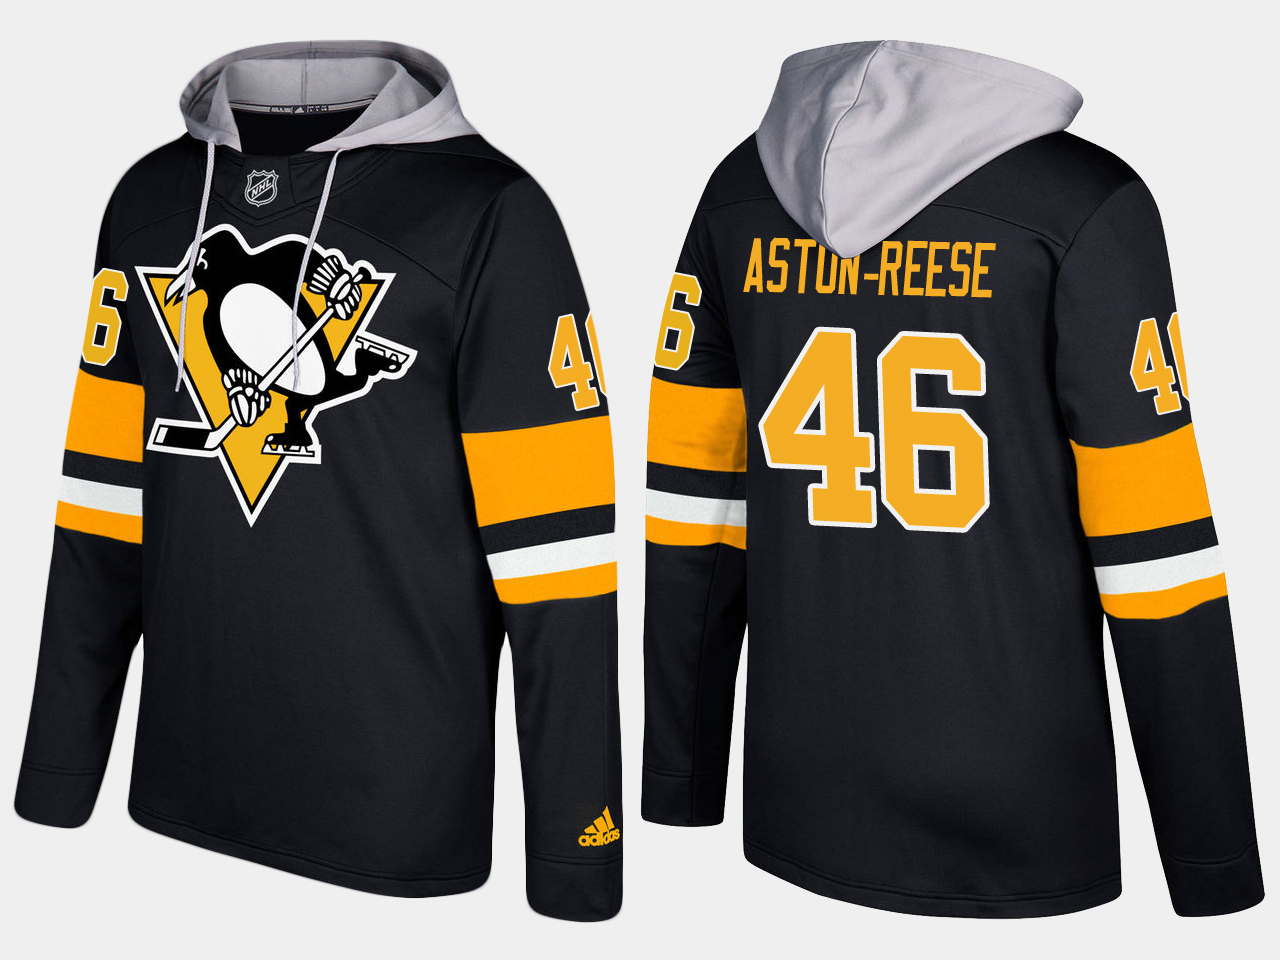 Nike Penguins 46 Zach Aston Reese Name And Number Black Hoodie